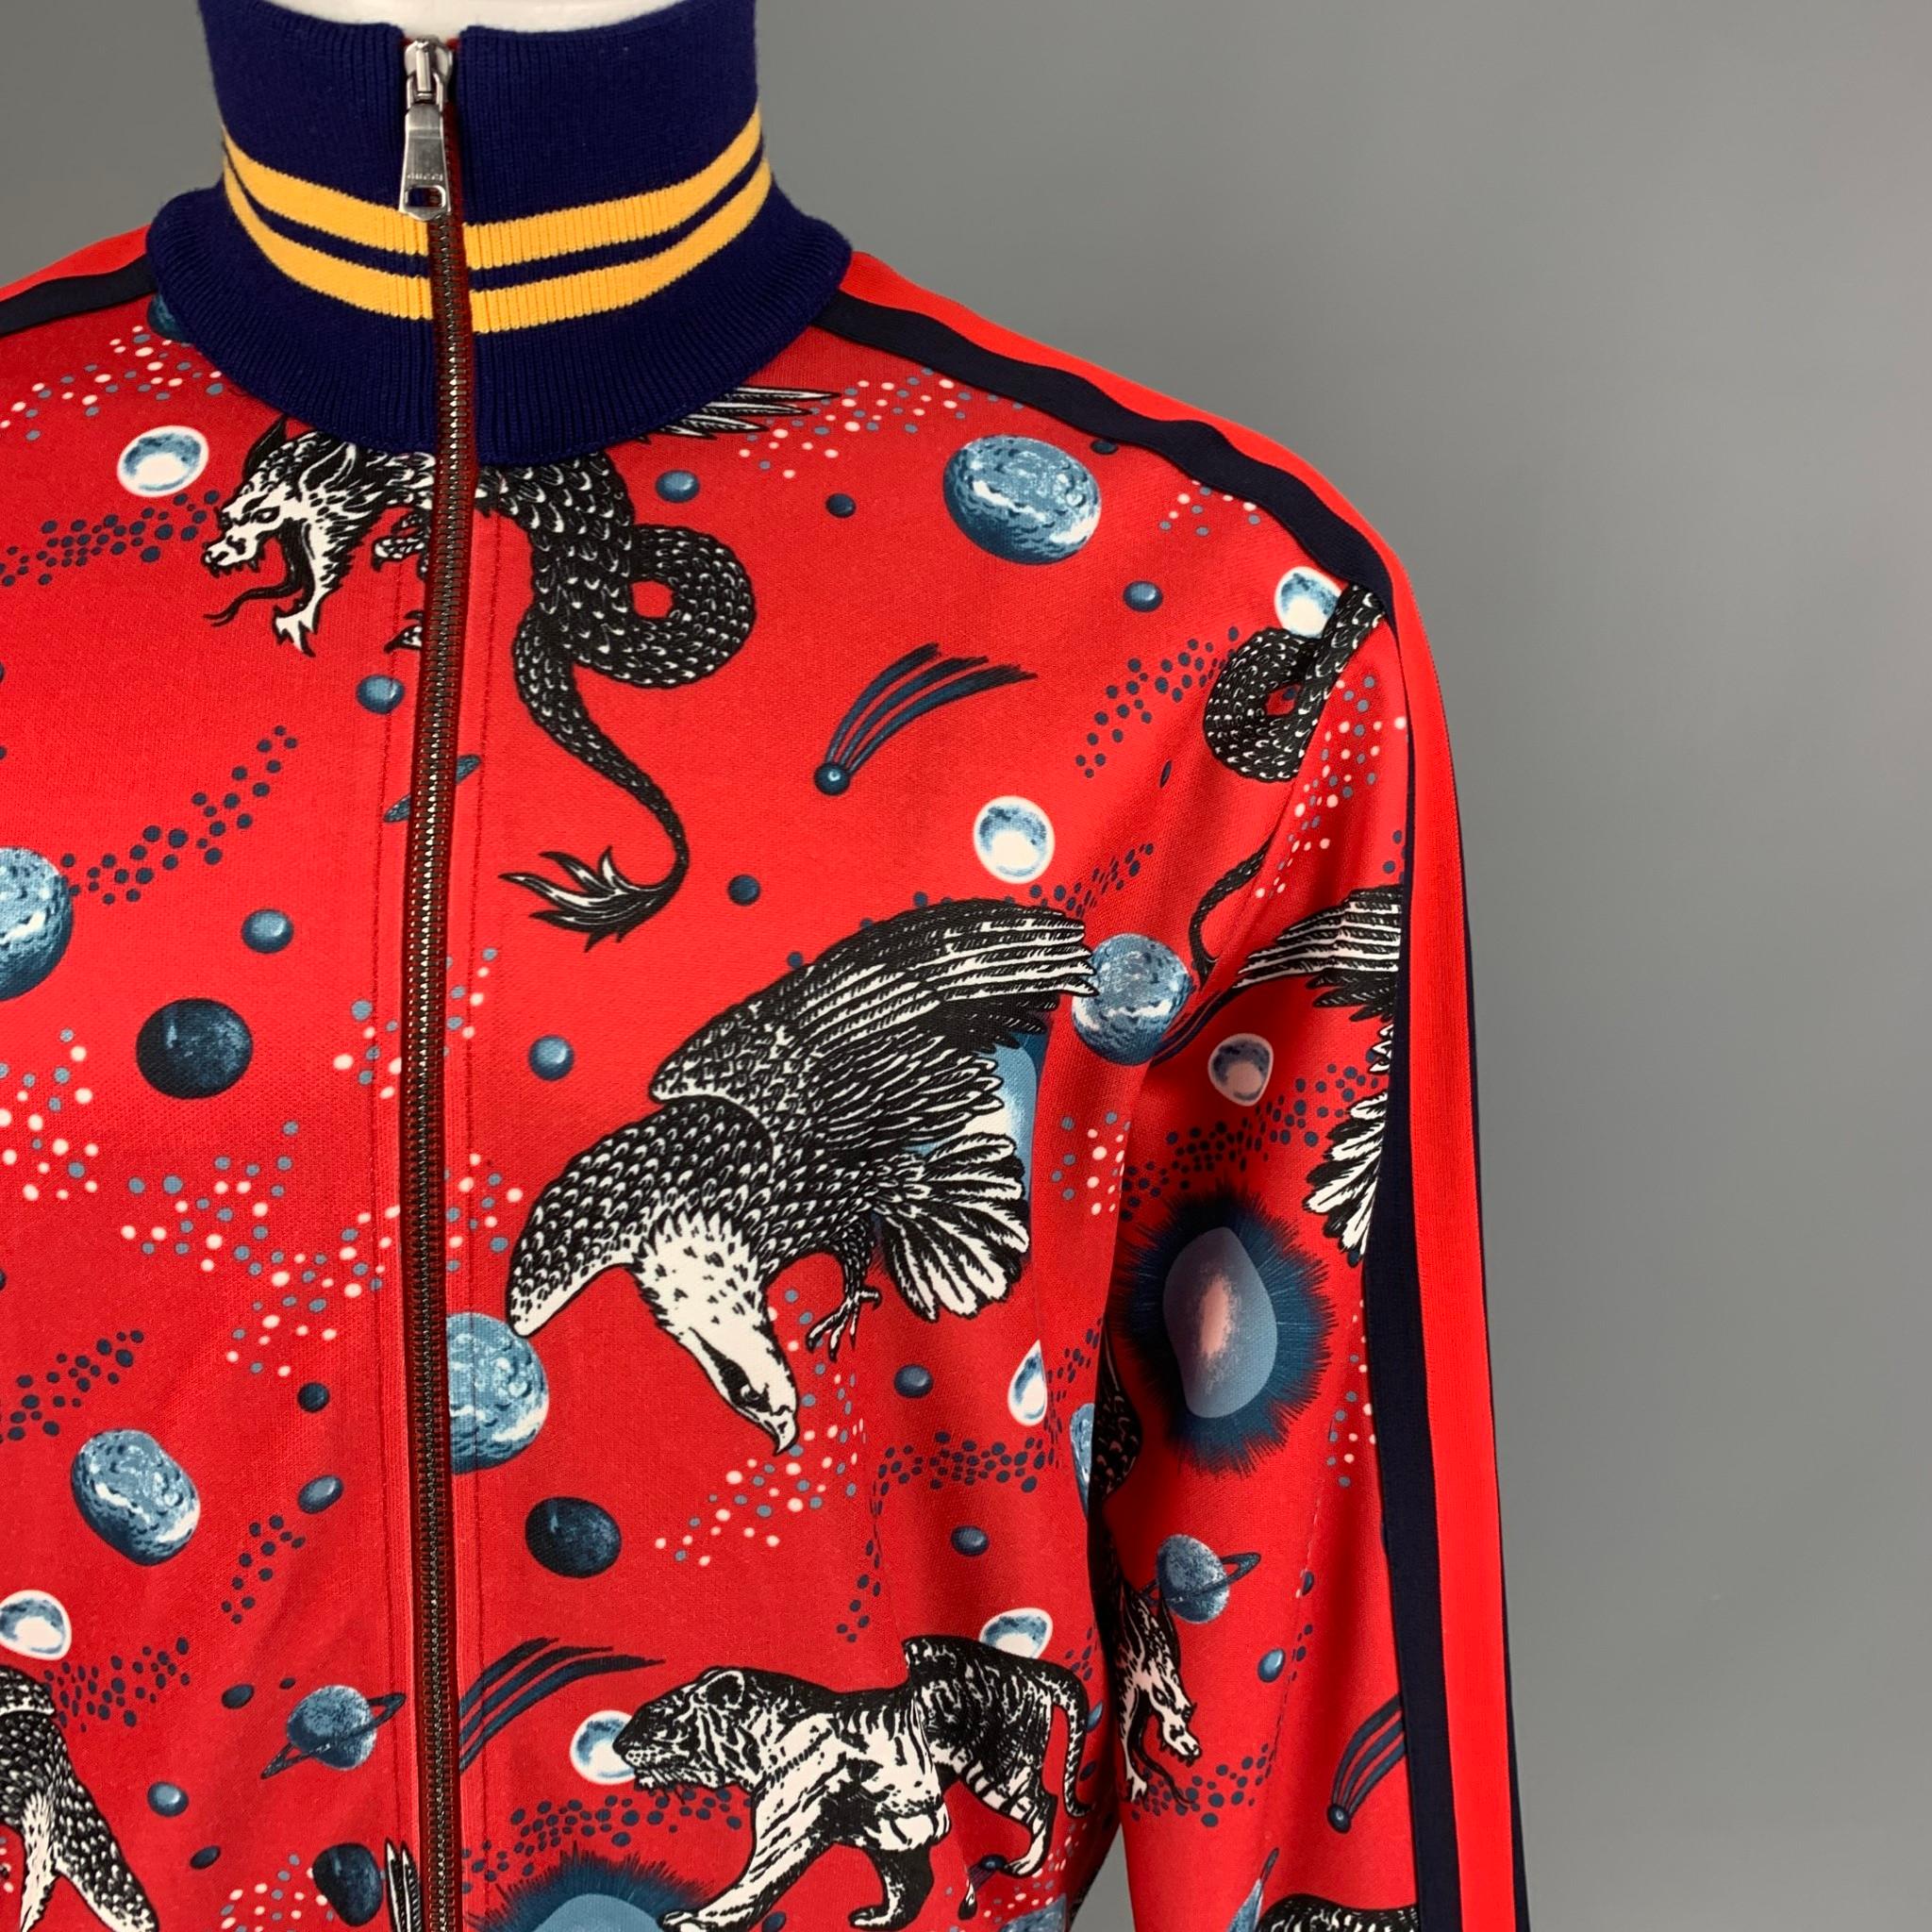 GUCCI by Alessandro Michele FW 17 jacket comes in a red 'space animal' graphic print featuring a high collar, striped ribbed hem, slit pockets, and a full zip up closure. Made in Italy. 

Excellent Pre-Owned Condition.
Marked: